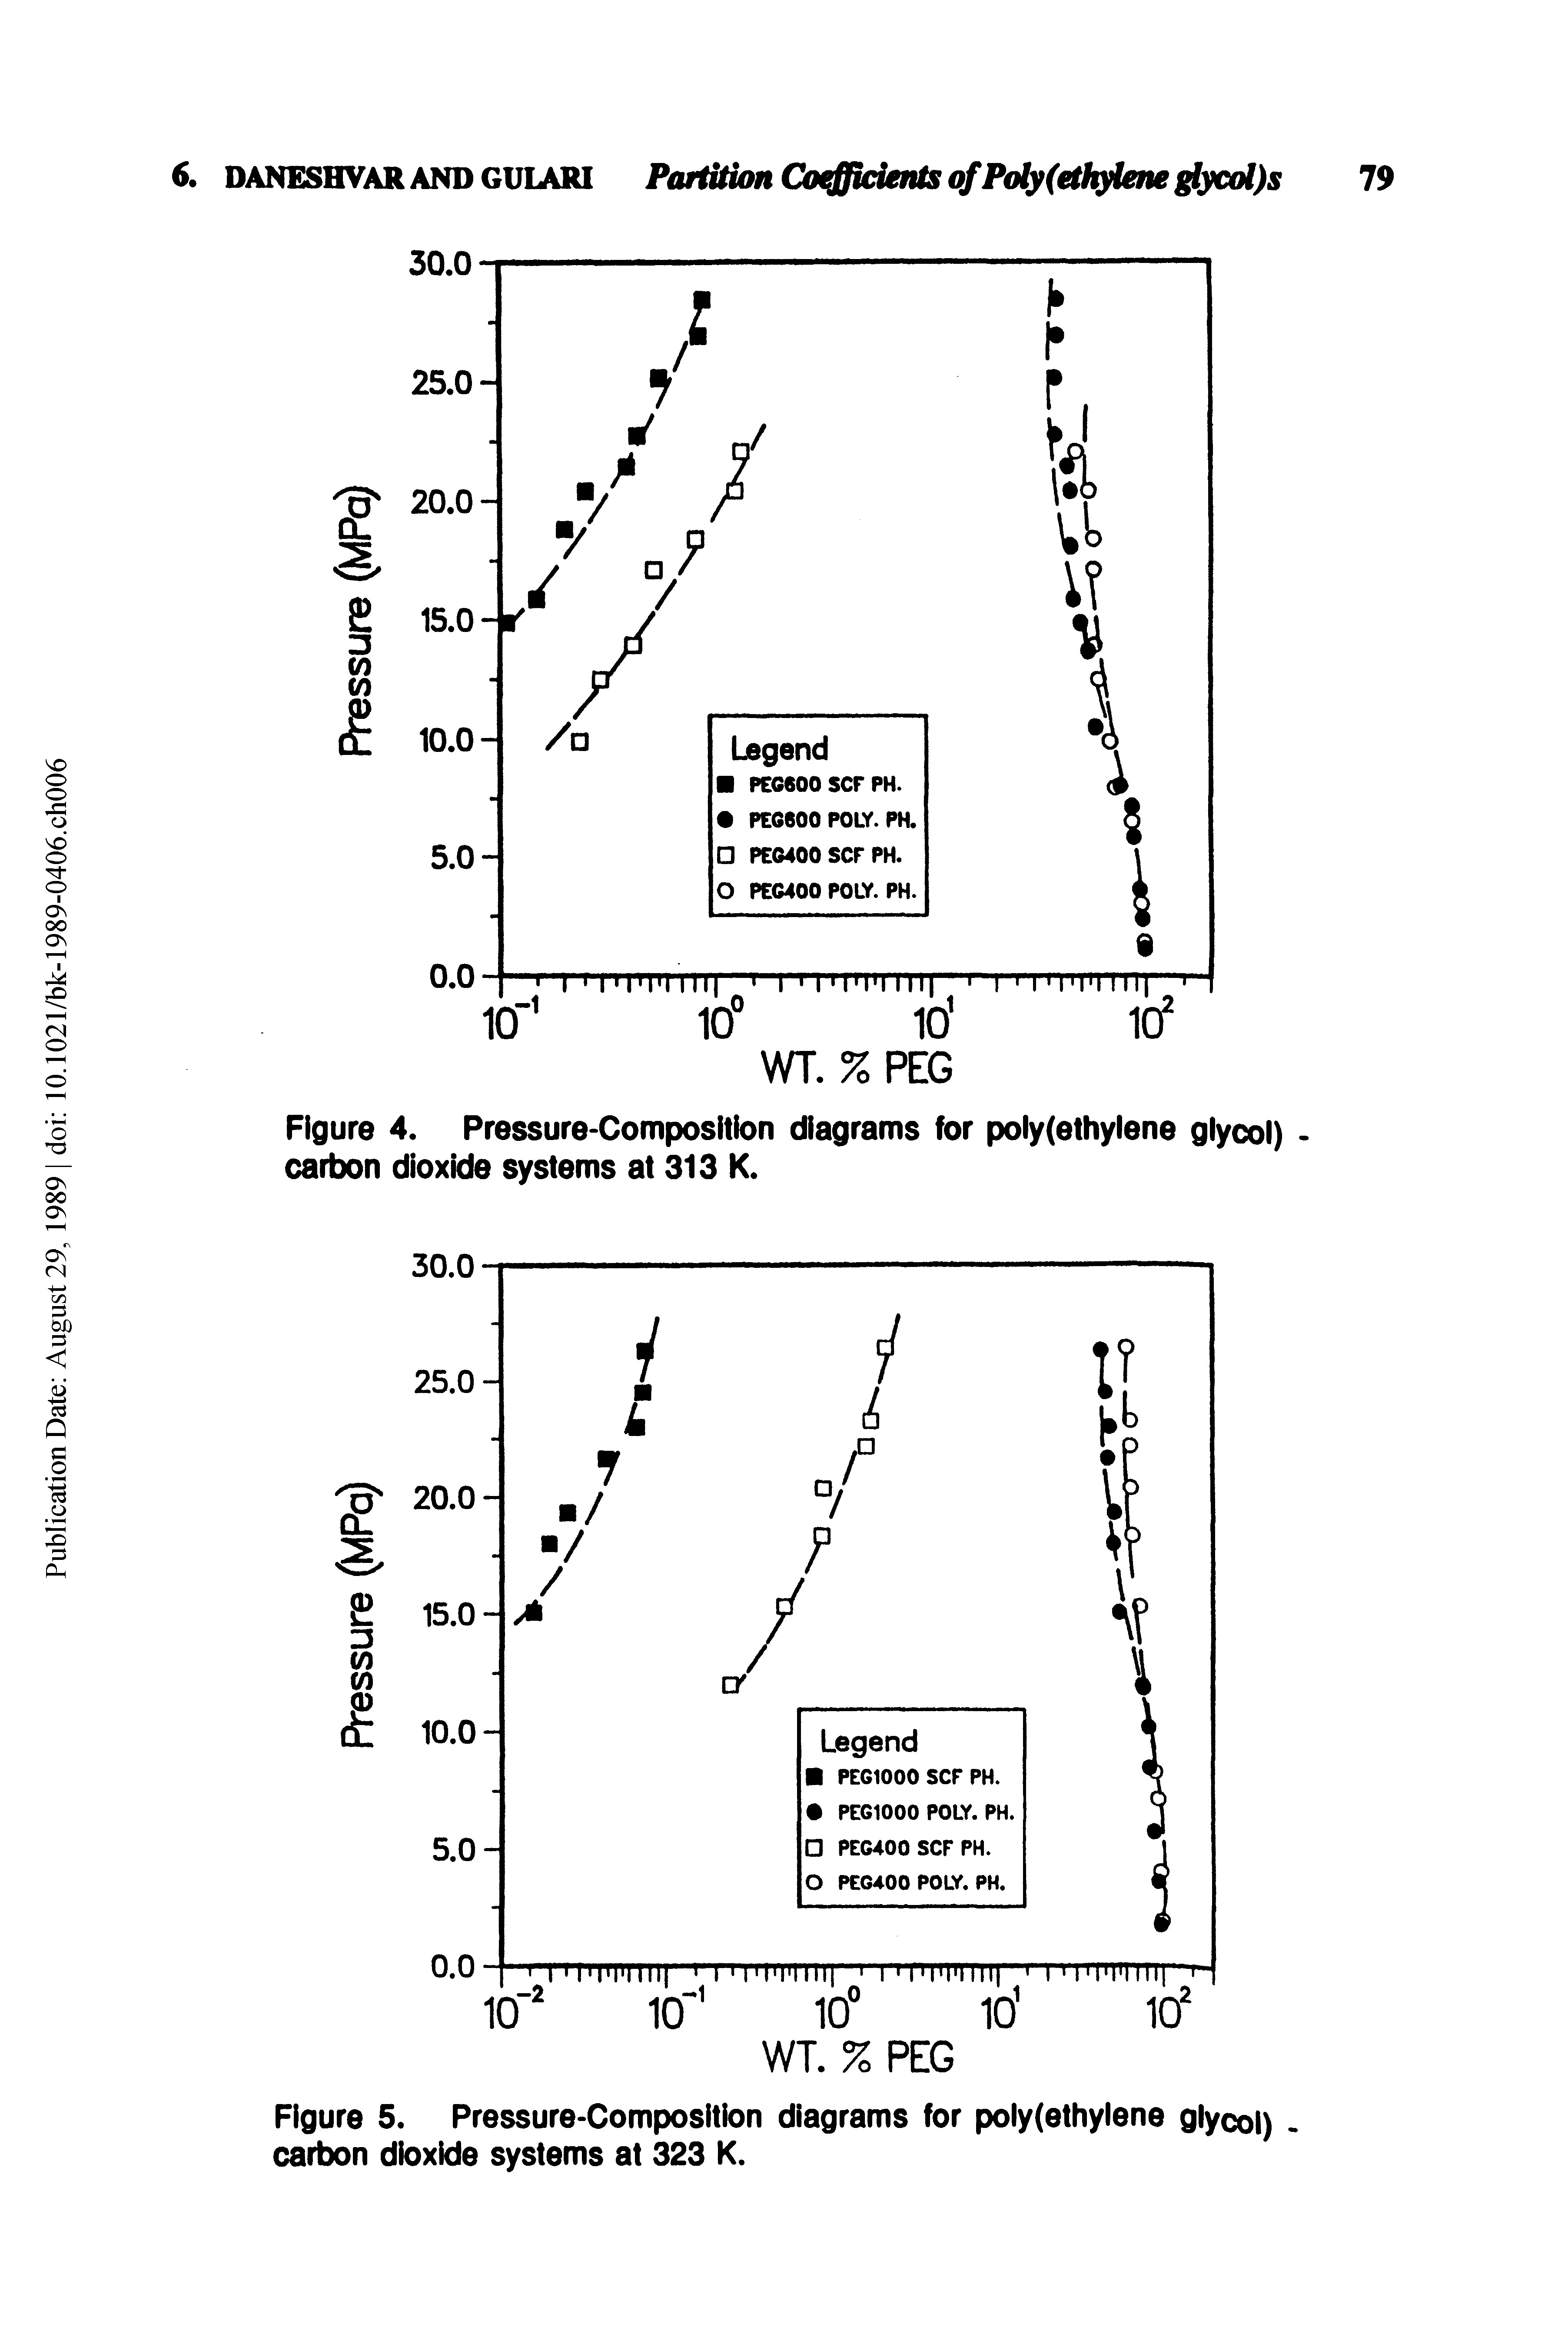 Figure 4. Pressure-Composition diagrams for poiy(elhyiene giycoi) carbon dioxide systems at 313 K.